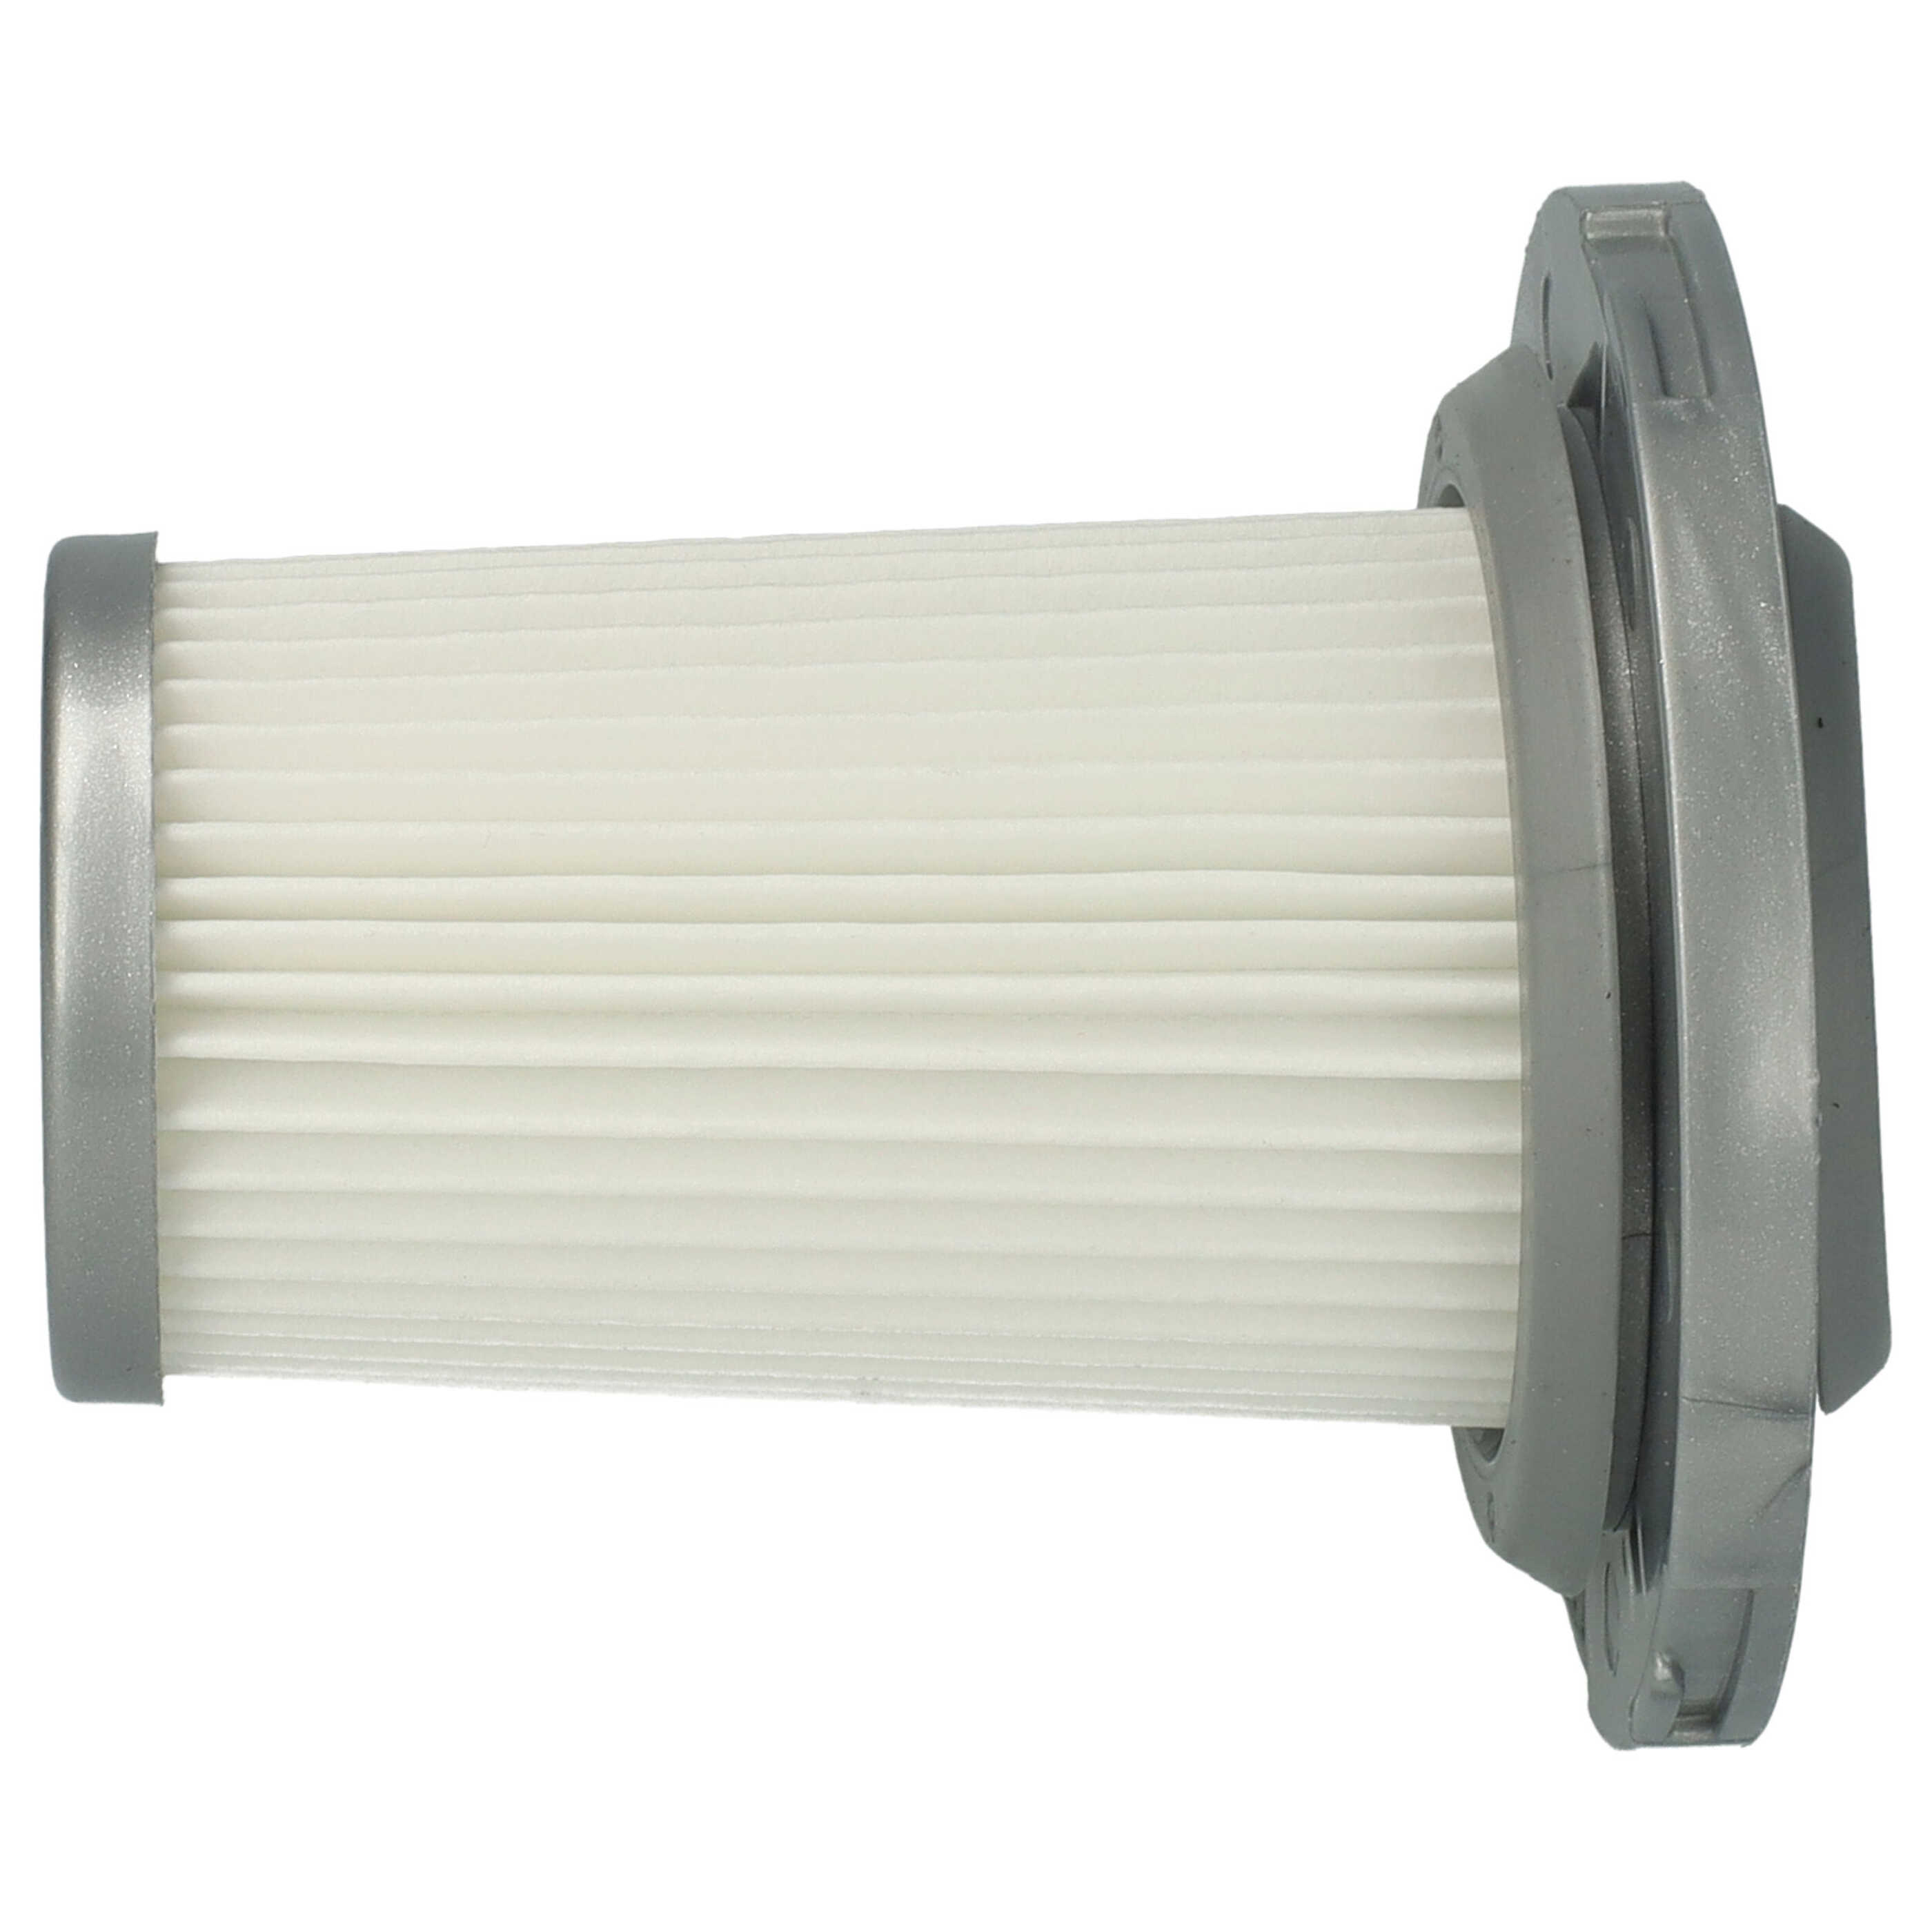 1x cartridge filter replaces Rowenta ZR009005 for Tefal Vacuum Cleaner